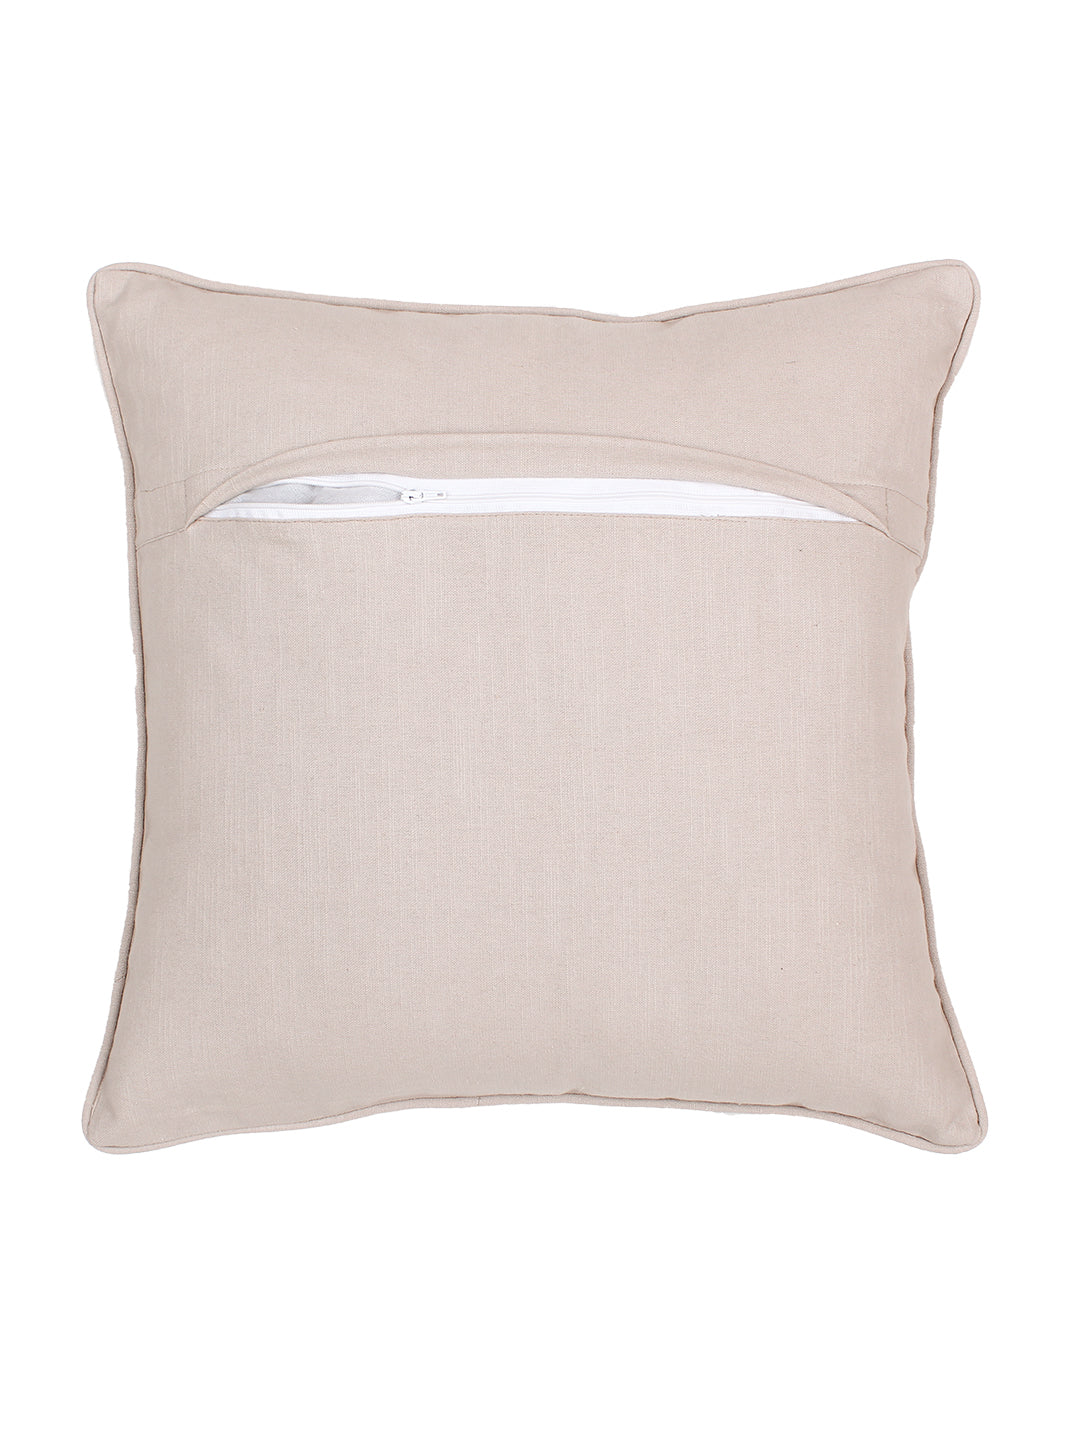 Purvanchal Cushion Cover - Gold/Grey